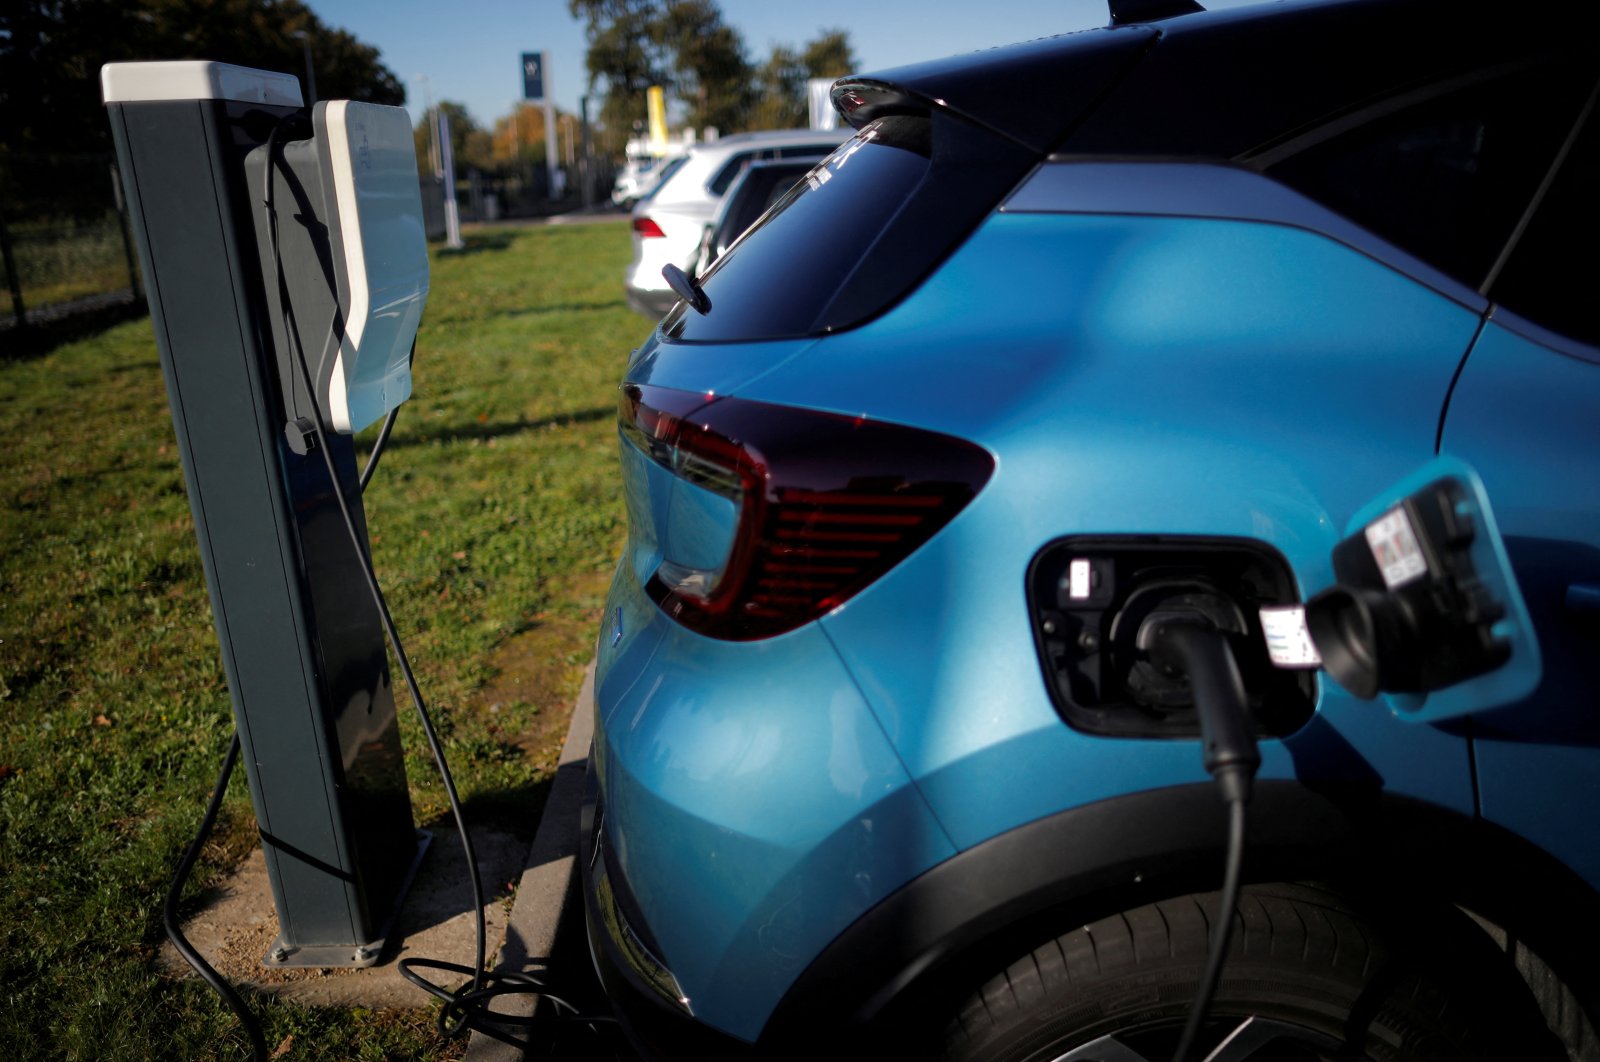 A Renault wall box is used by a Renault Captur hybrid car at a dealership in Les Sorinieres, near Nantes, France, Oct. 23, 2020. (Reuters Photo)